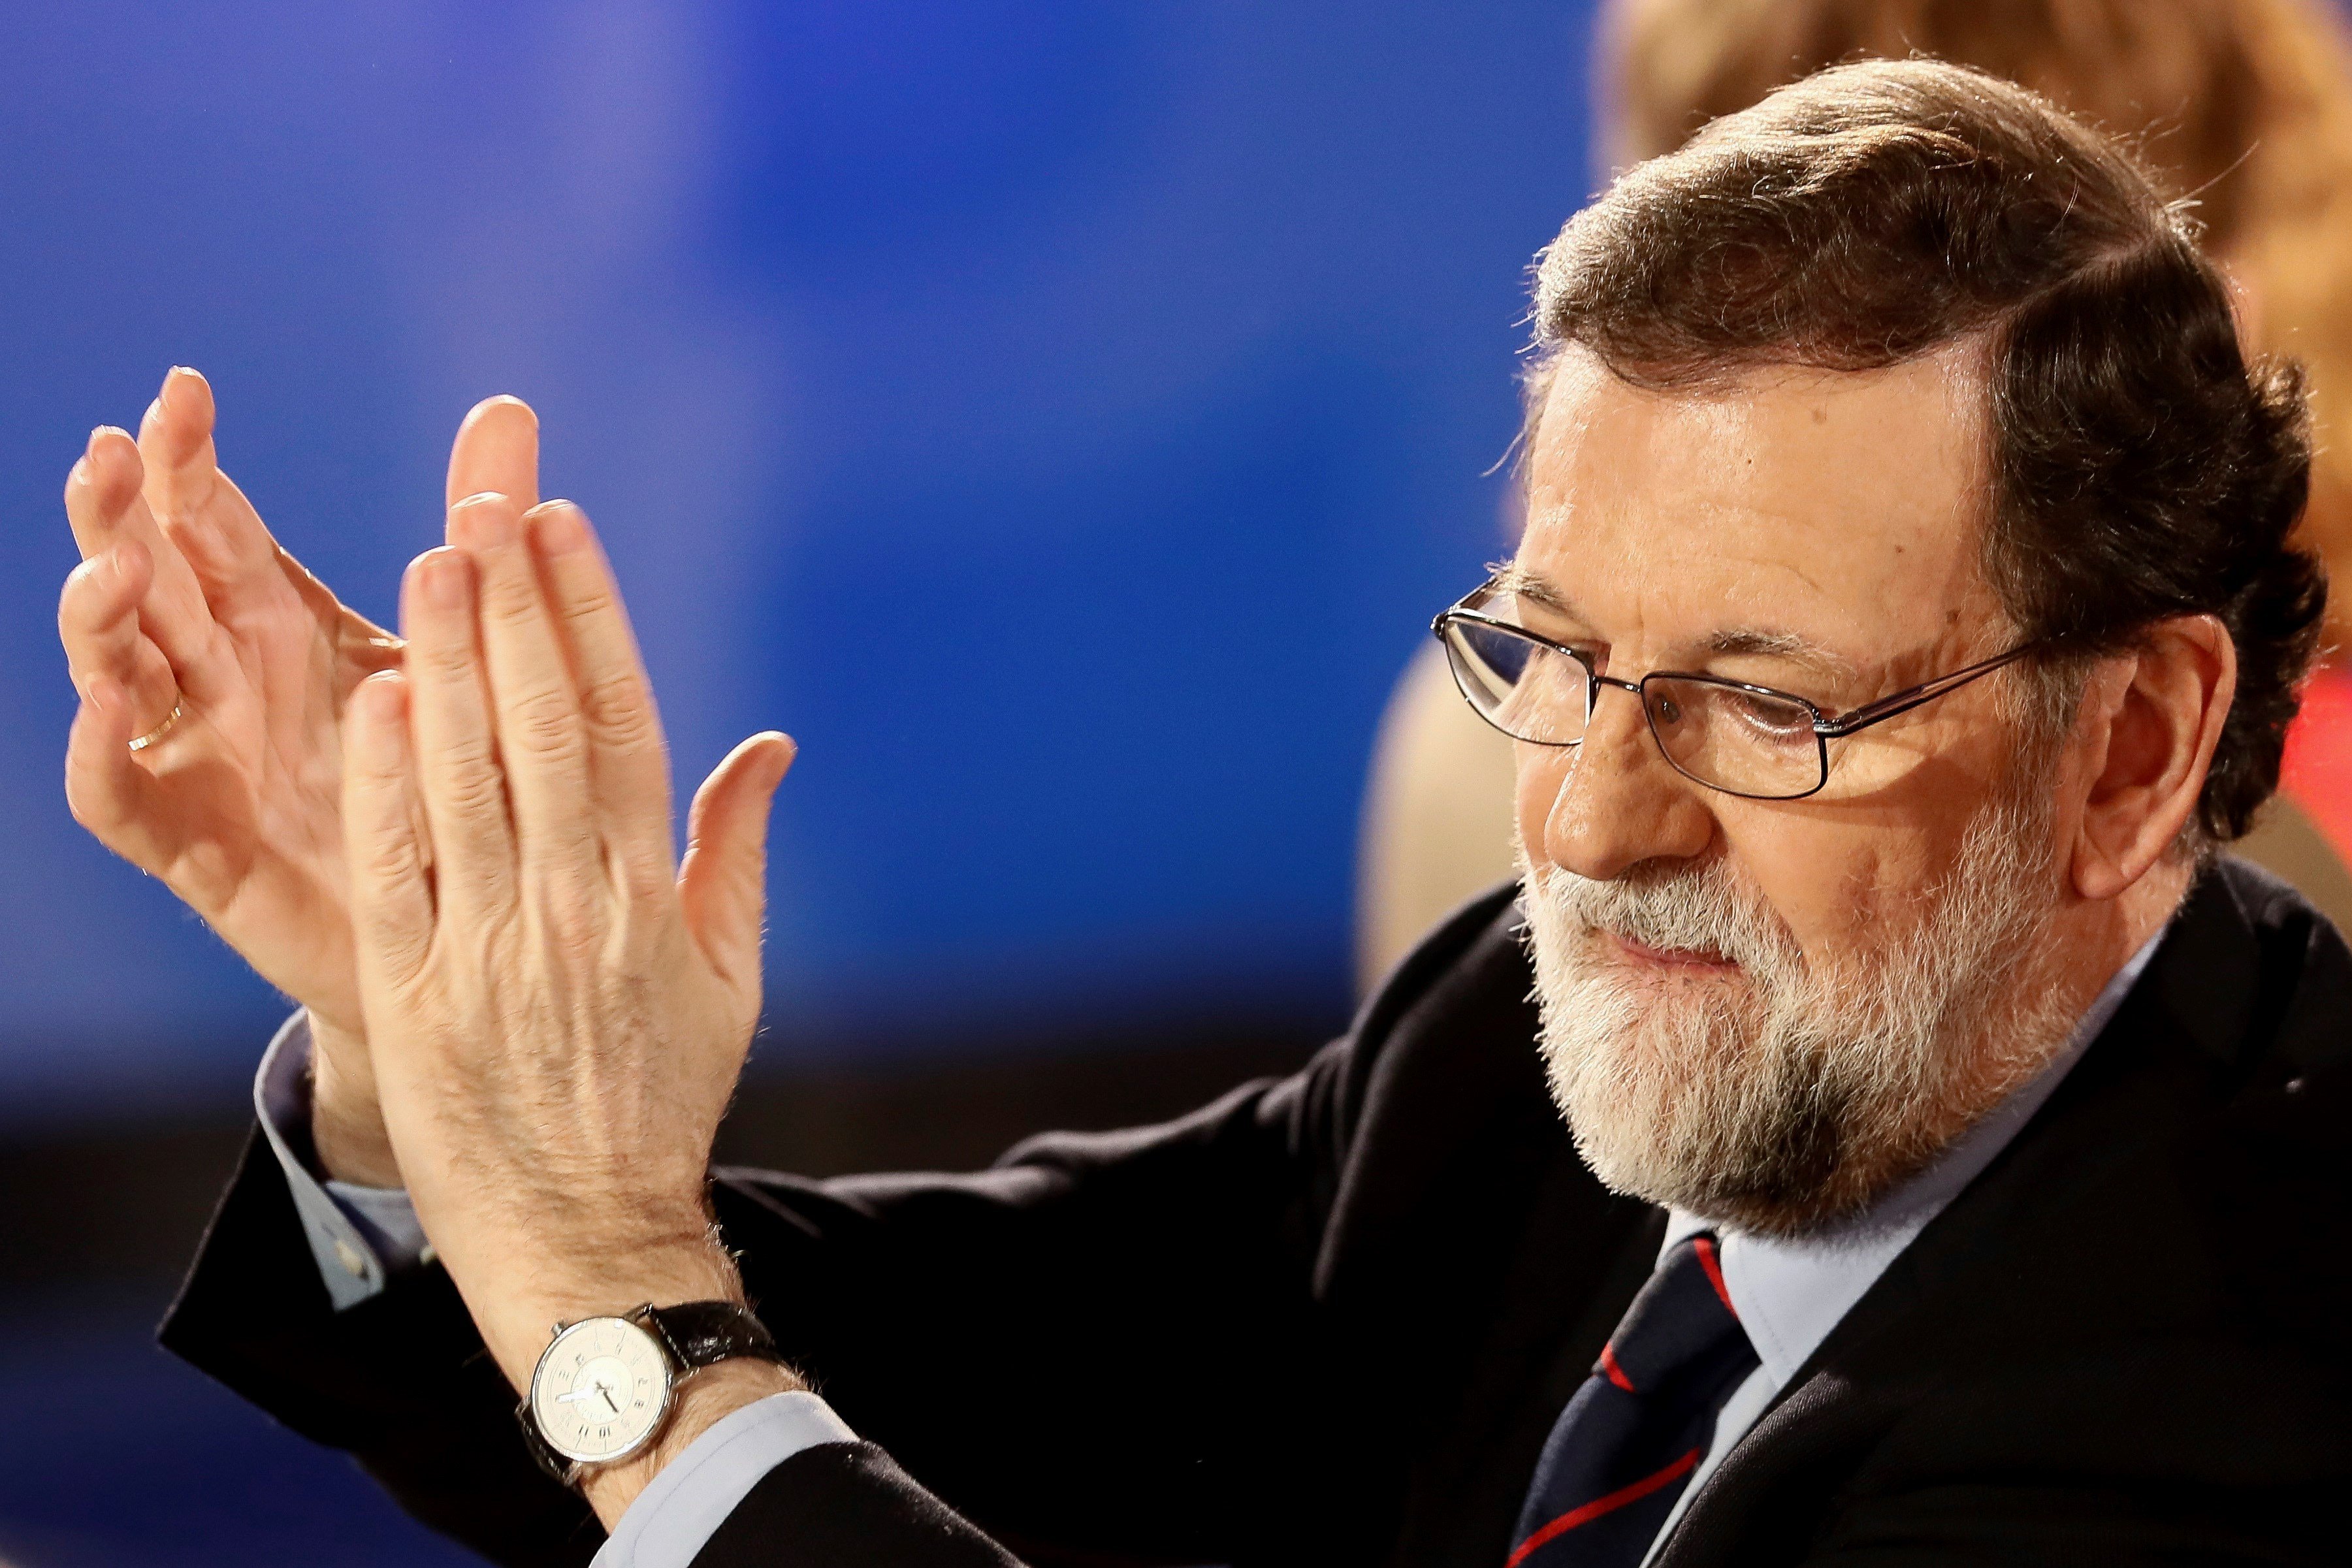 Rajoy goes ahead with appealing Puigdemont's investiture to the Constitutional Court